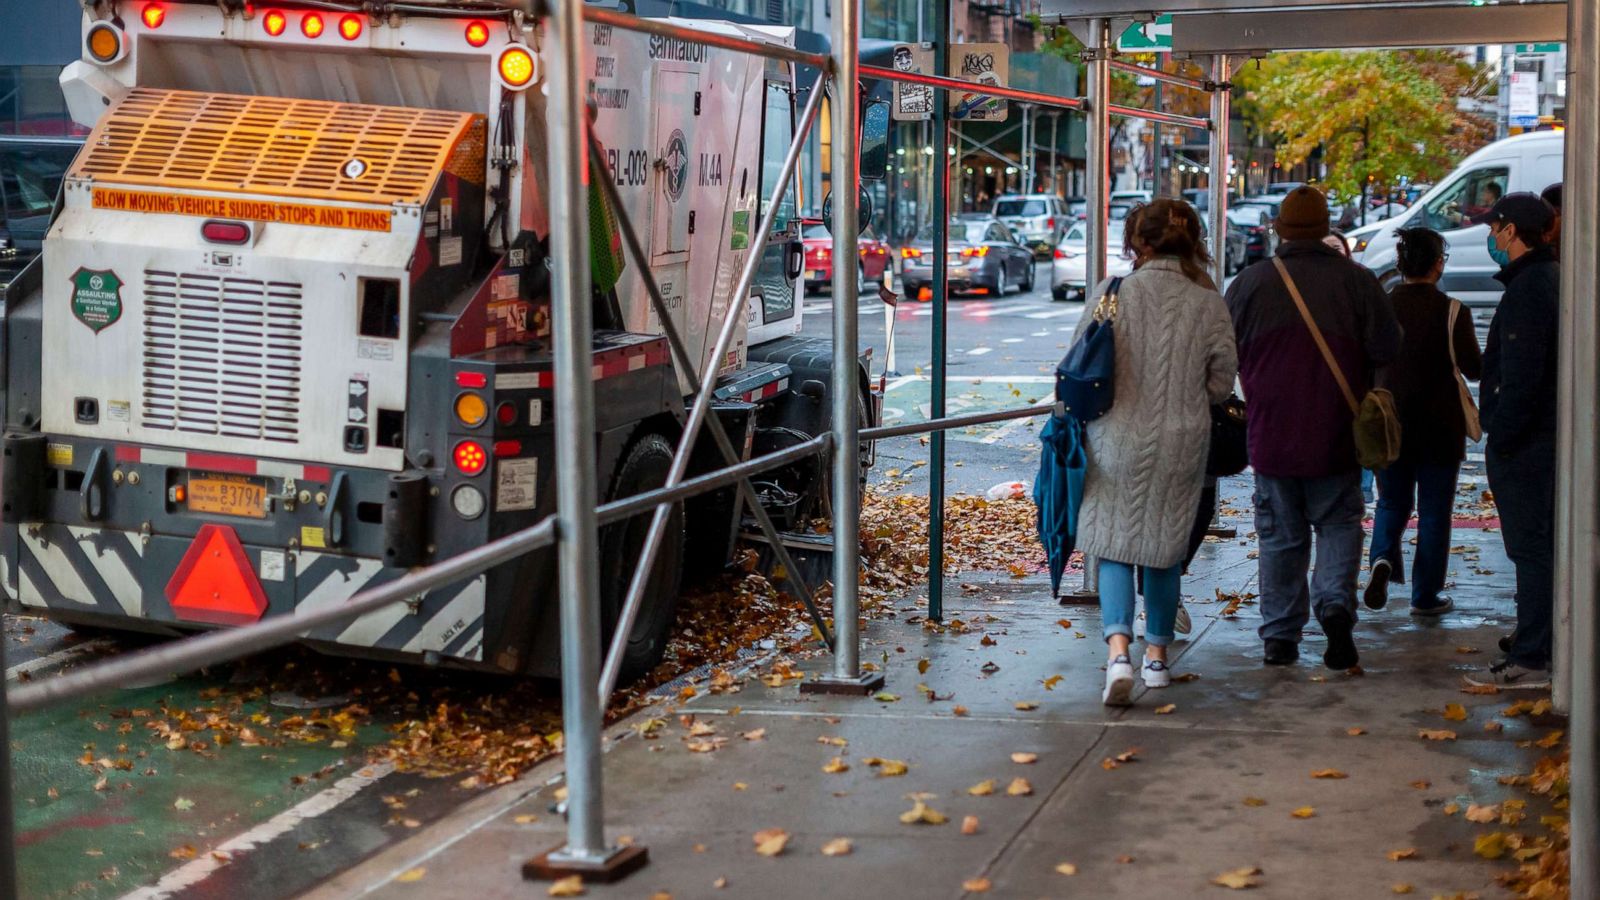 Street vending in NYC will soon be handled by the sanitation